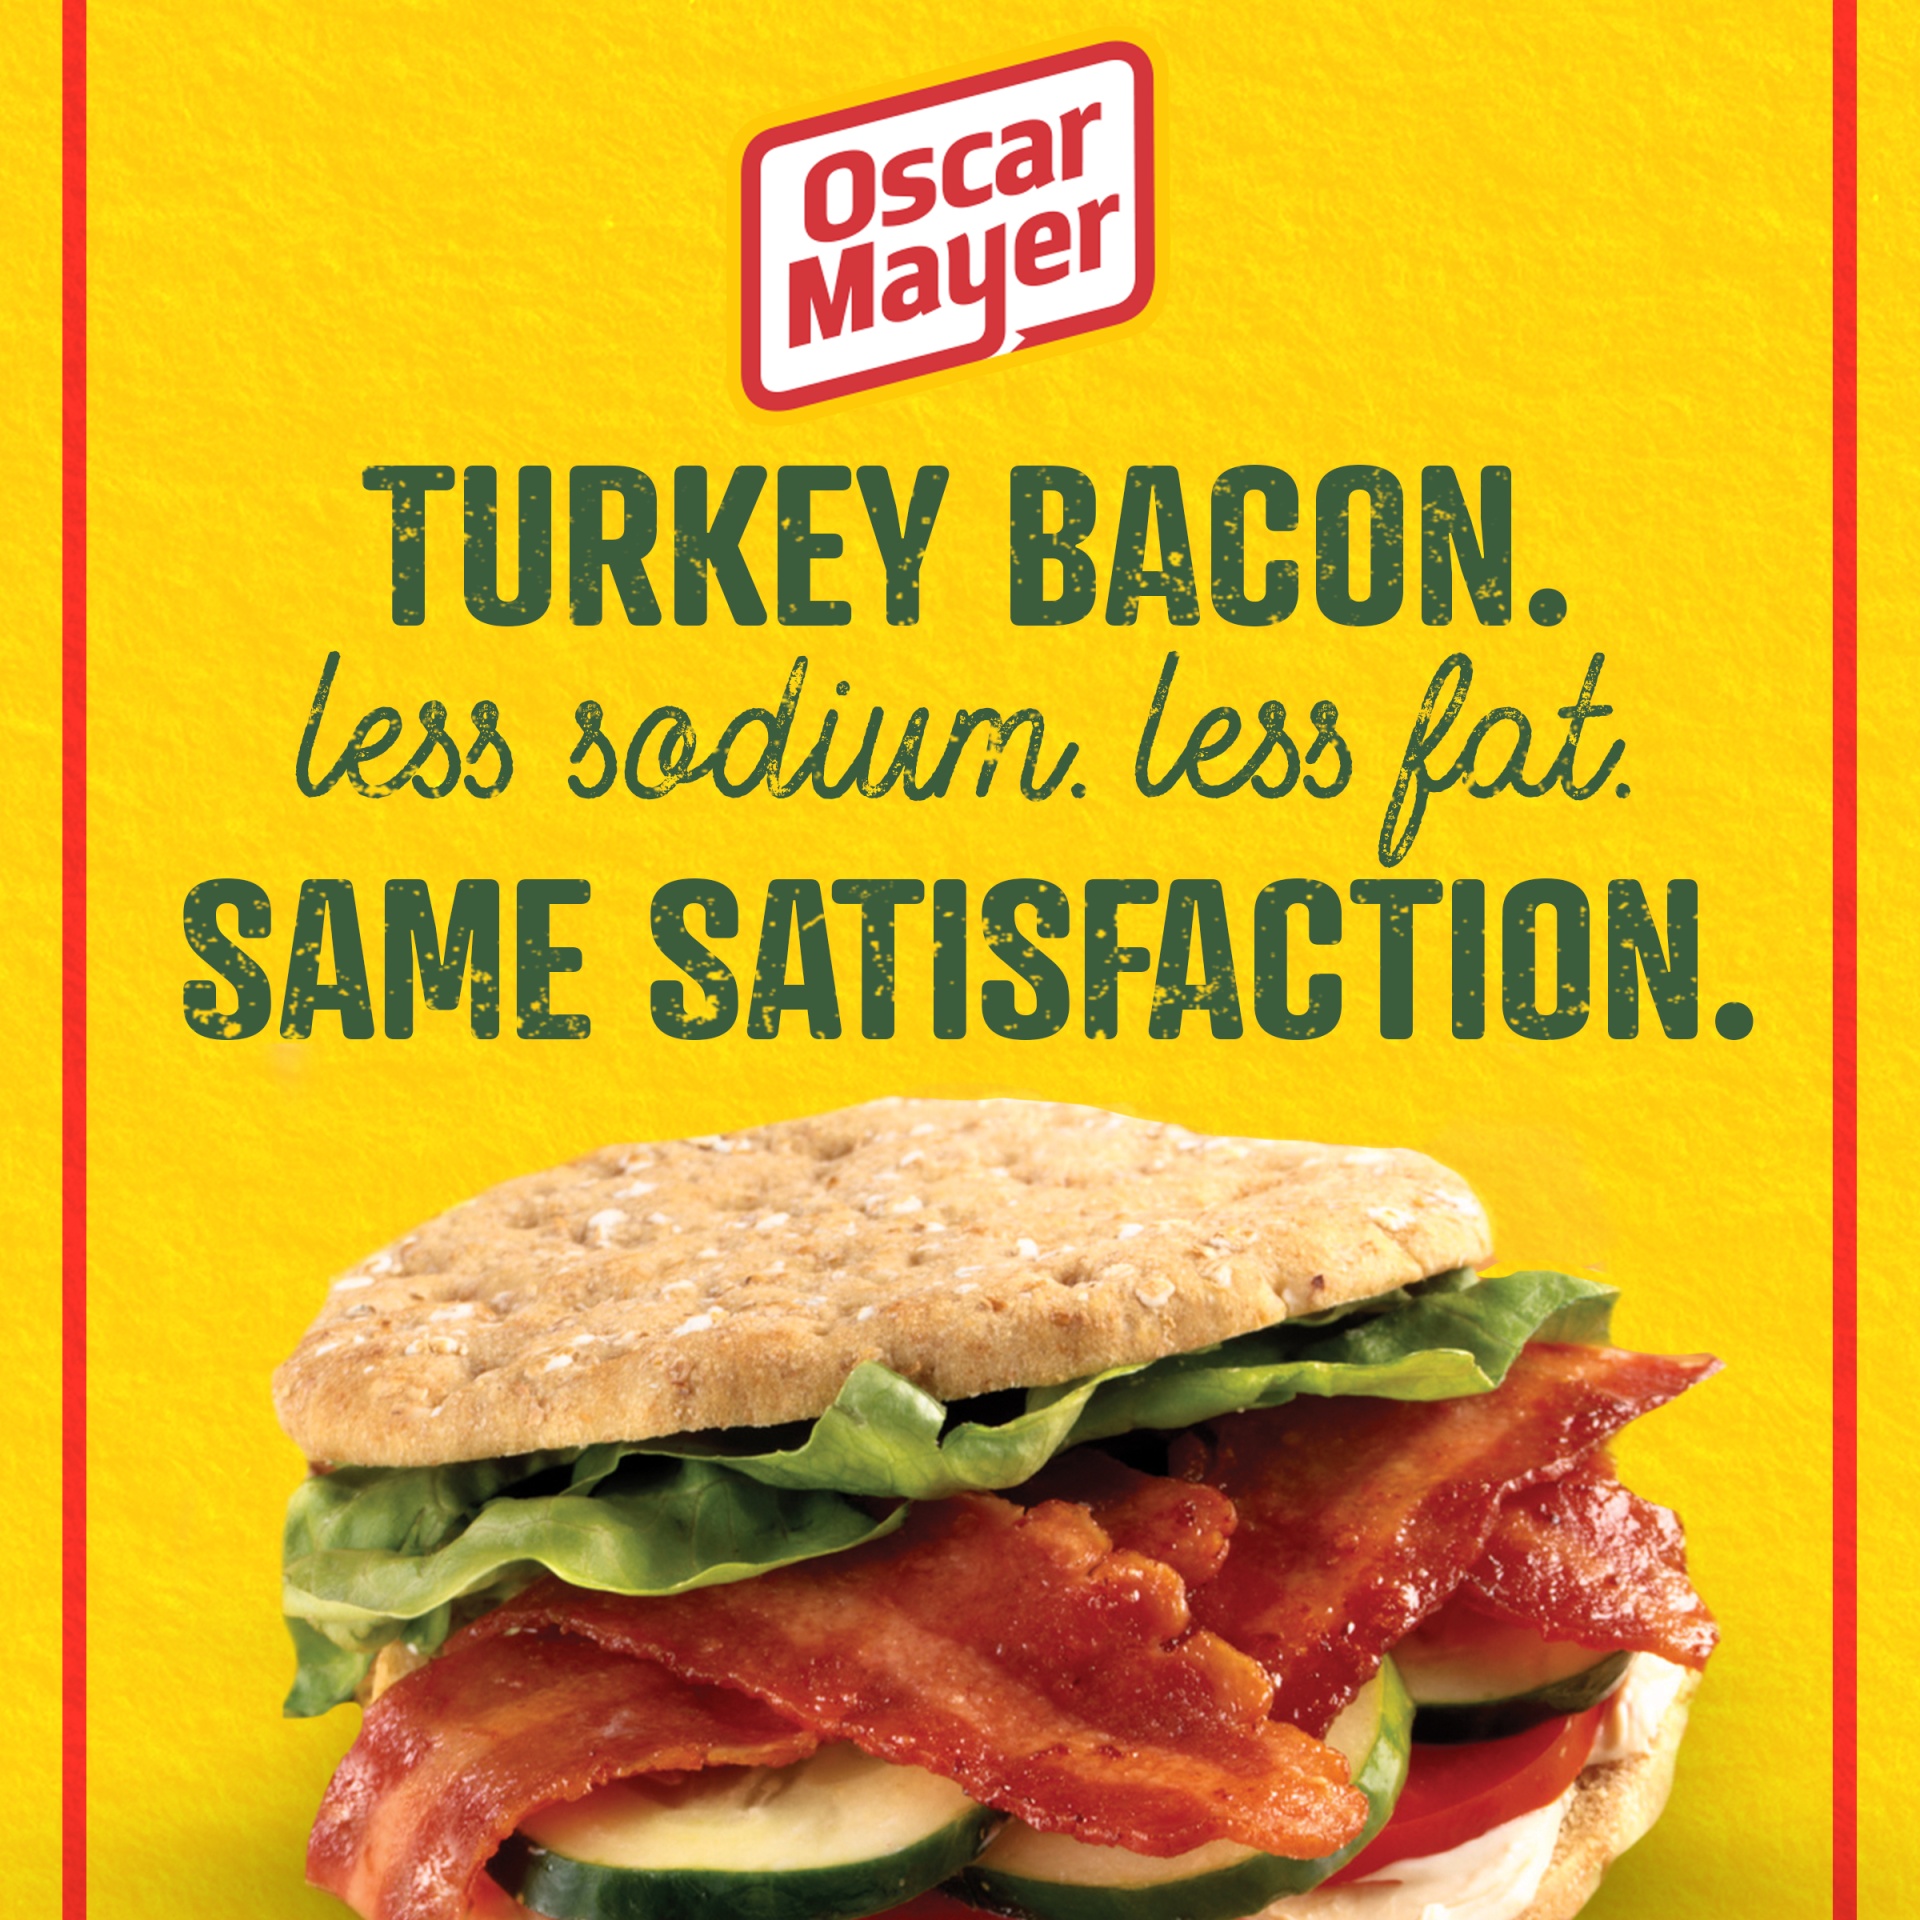 slide 3 of 12, Oscar Mayer Fully Cooked & Gluten Free Turkey Bacon with 58% Less Fat & 57% Less Sodium Pack, 21-23 slices, 12 oz